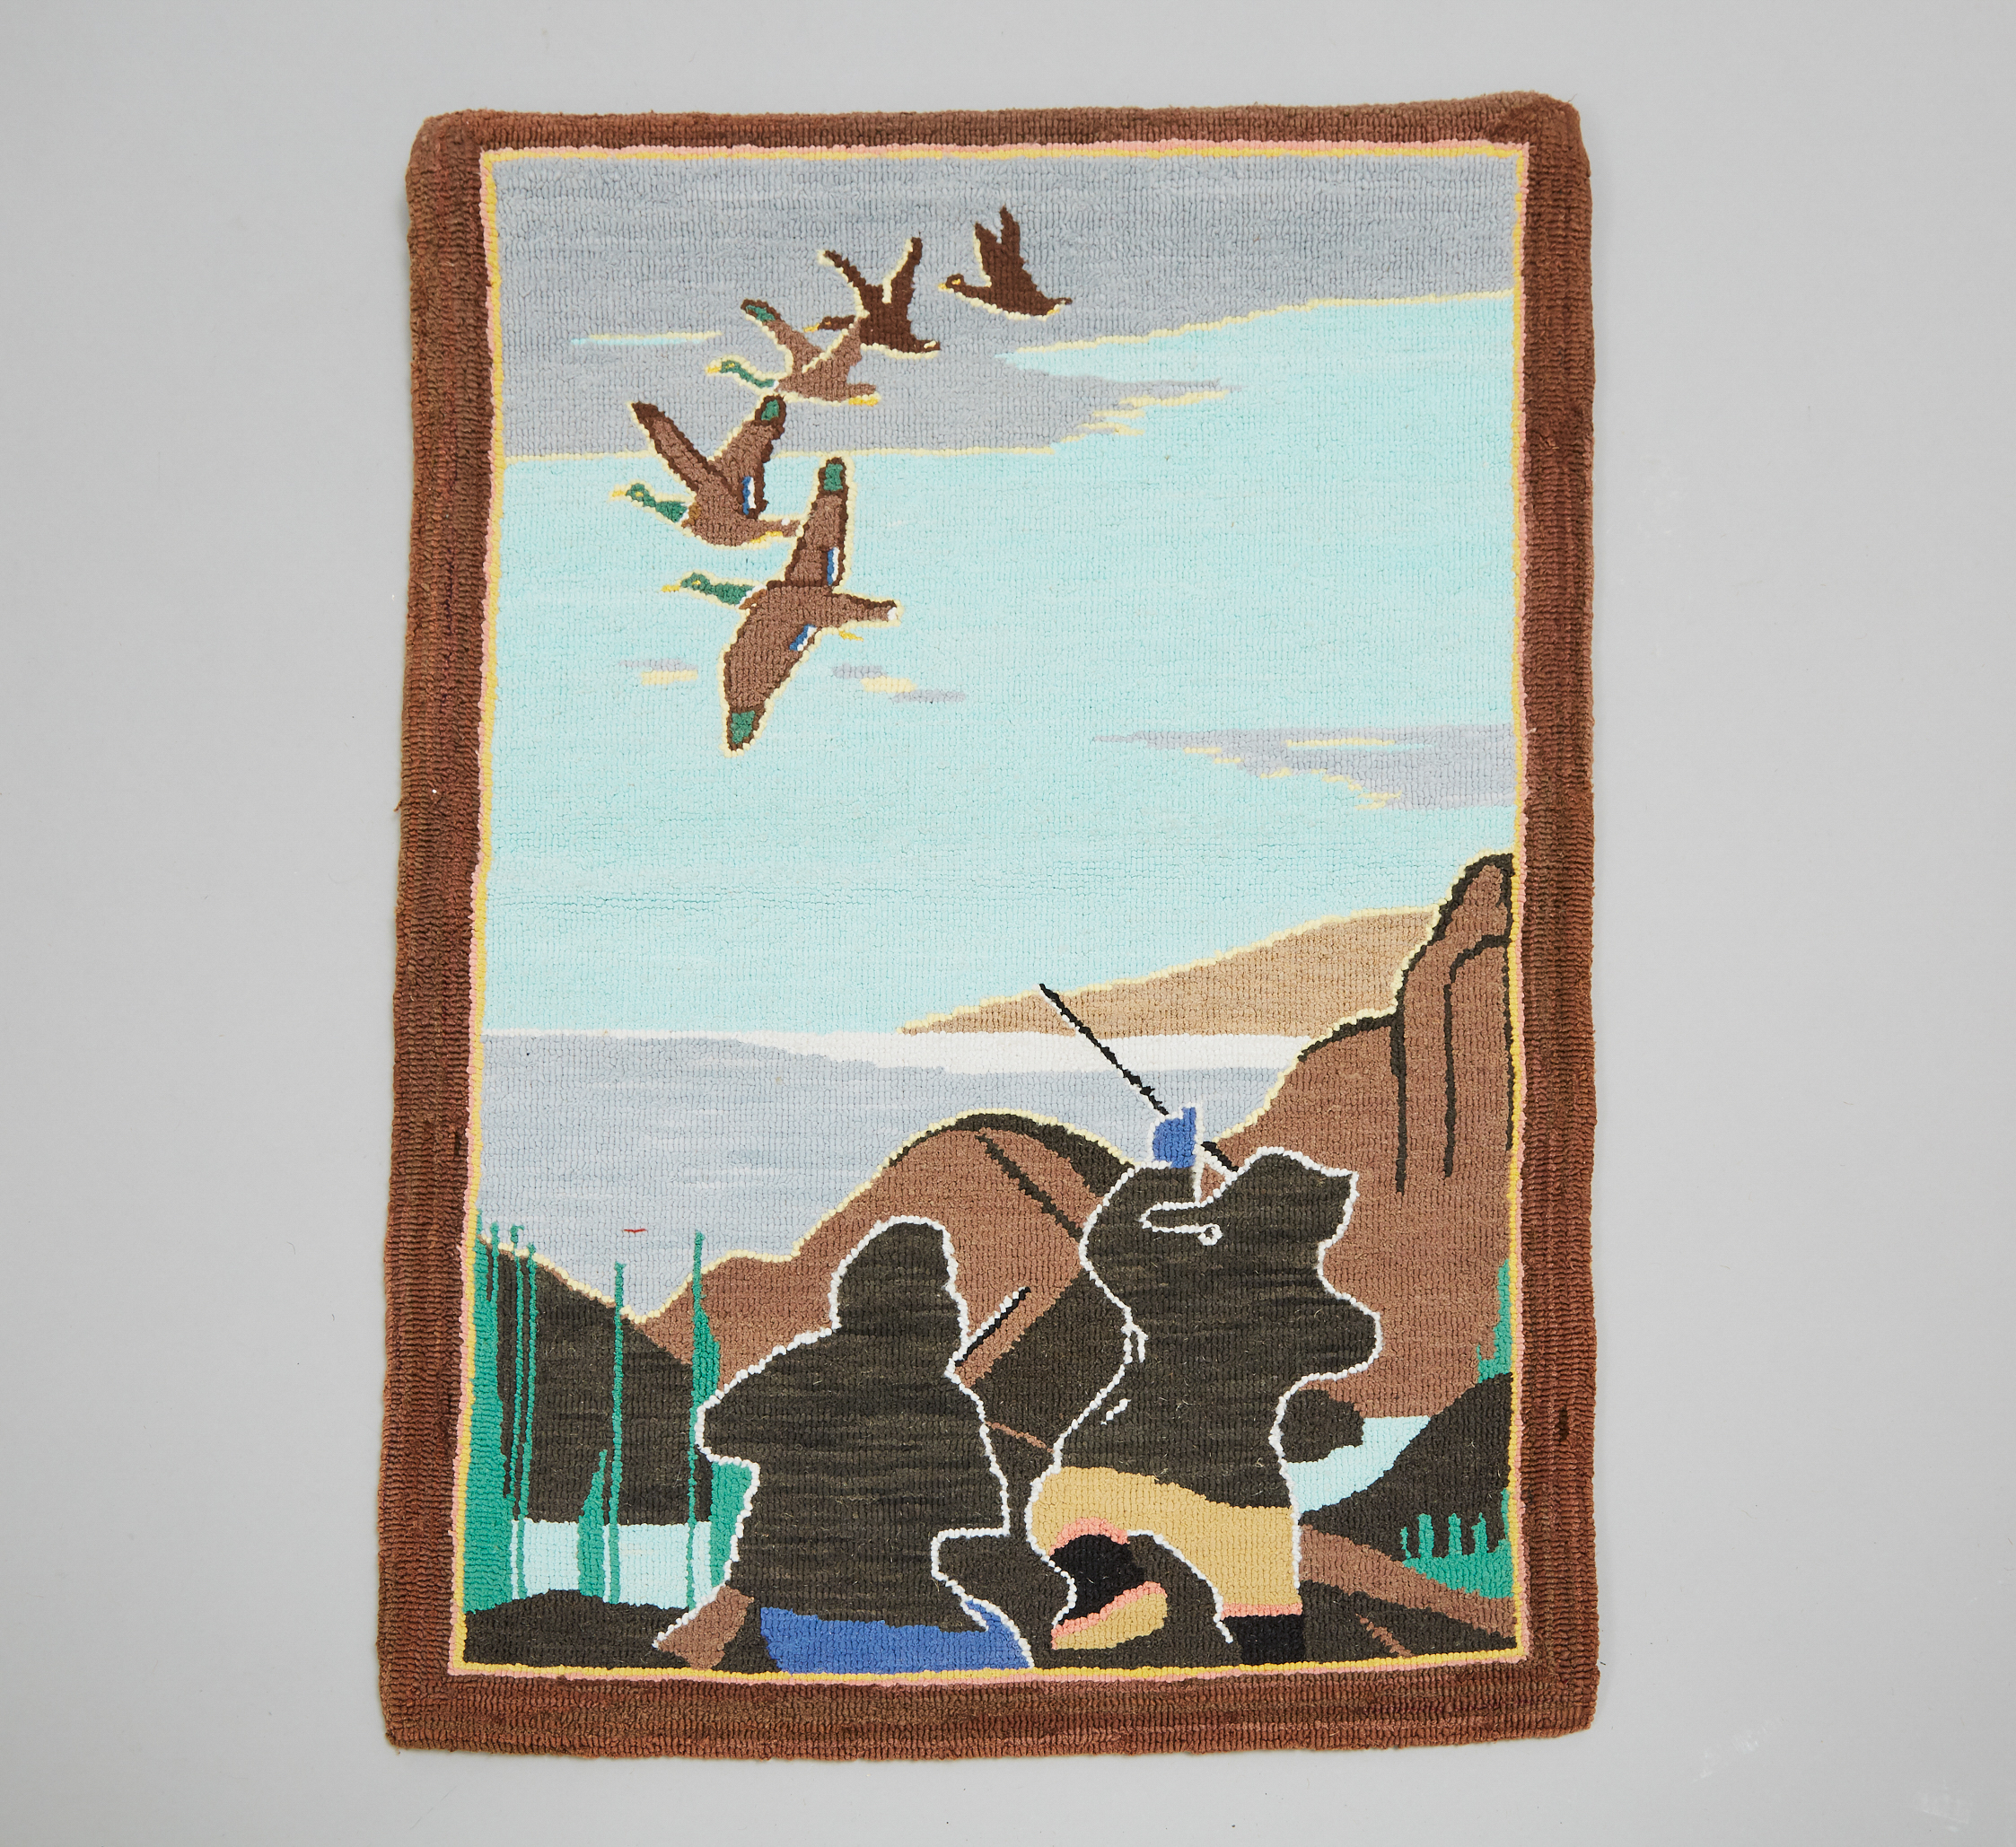 Grenfell Labrador Industries 'Duck Hunting' Hooked Mat, c.1930